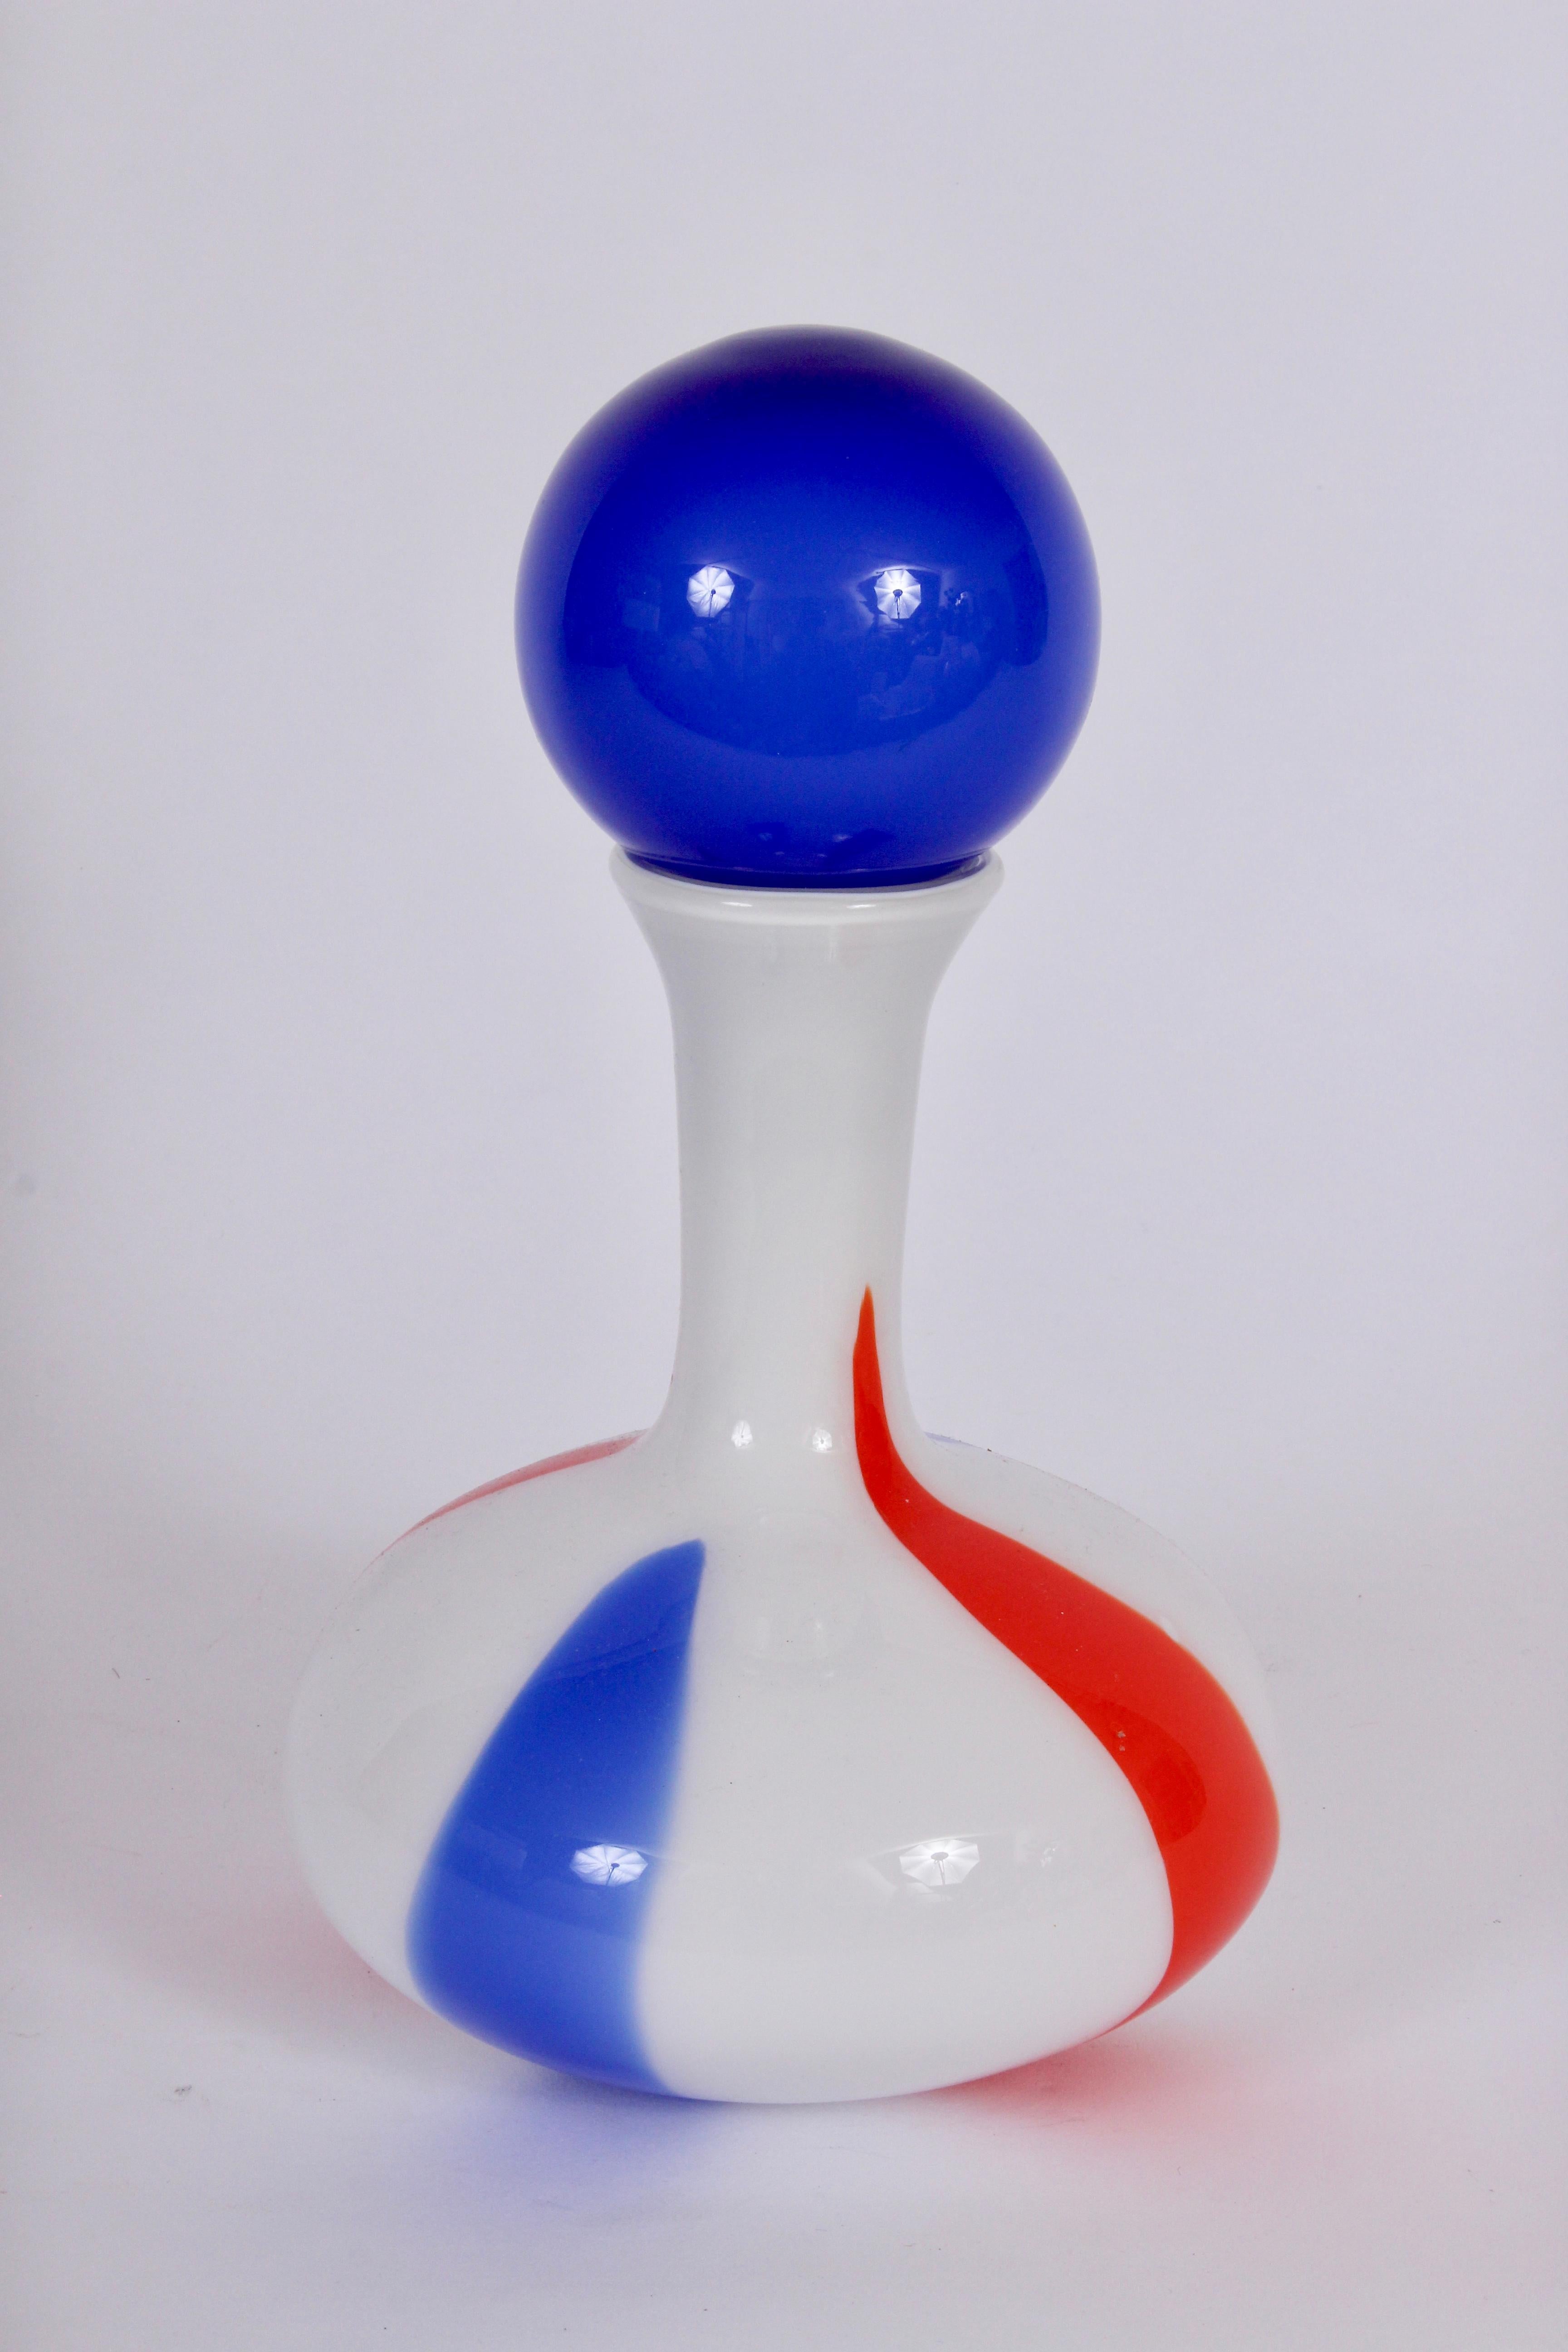 Early Carlo Moretti Italian modern marbled opaque Murano glass decanter, circa 1960. Hand crafted white, deep orange and bright blue swirl design with solid blue stopper. Heavy. Colorful. Festive. Reflective. Measures: 9.5 H to top of bottle. Like